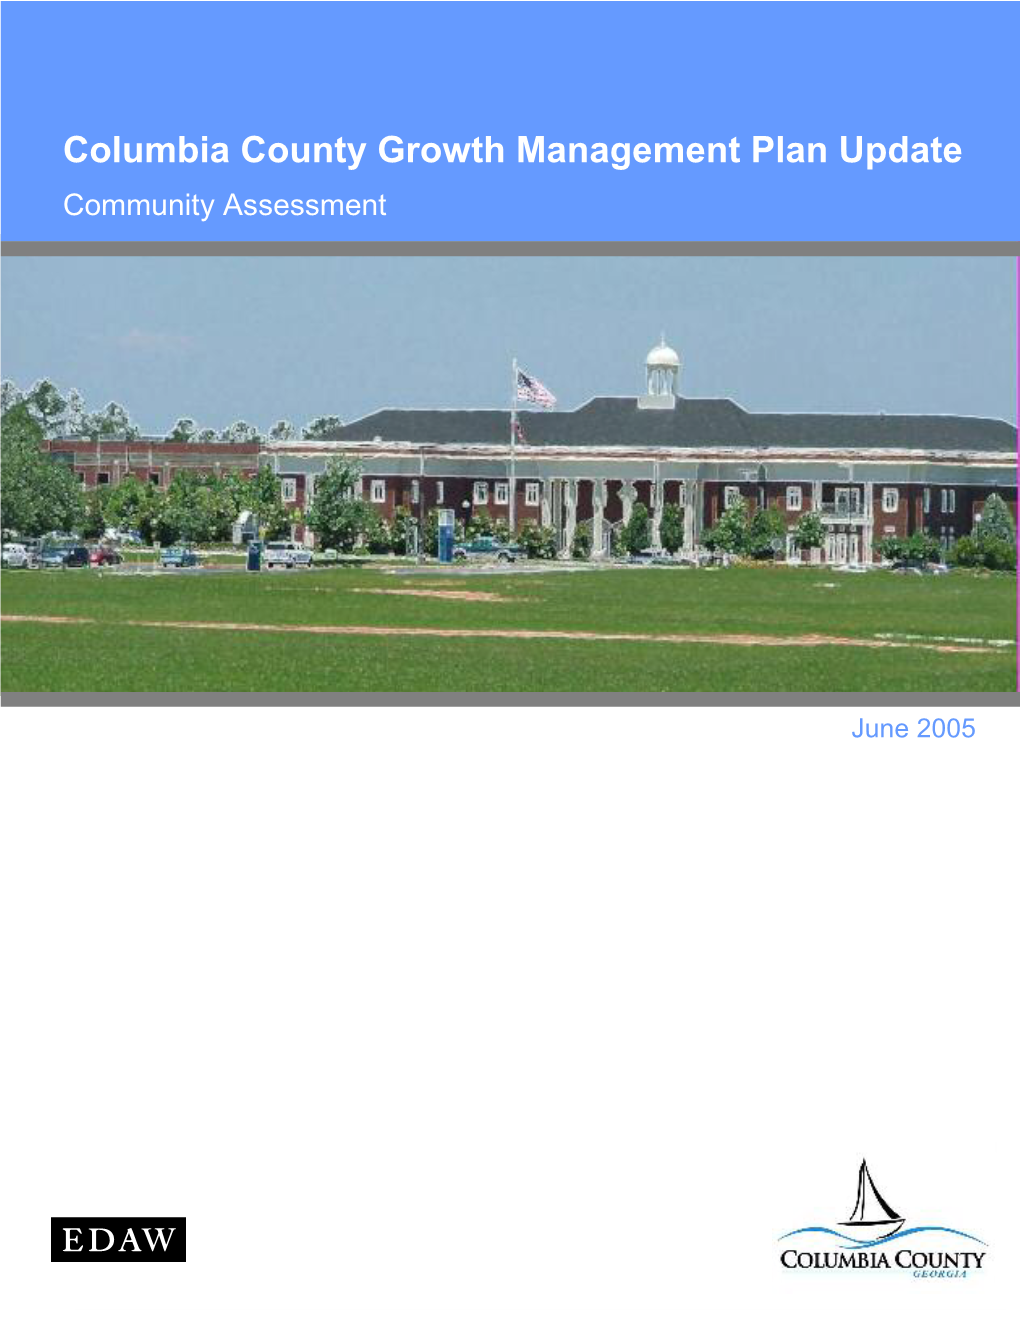 Columbia County Growth Management Plan Update Community Assessment